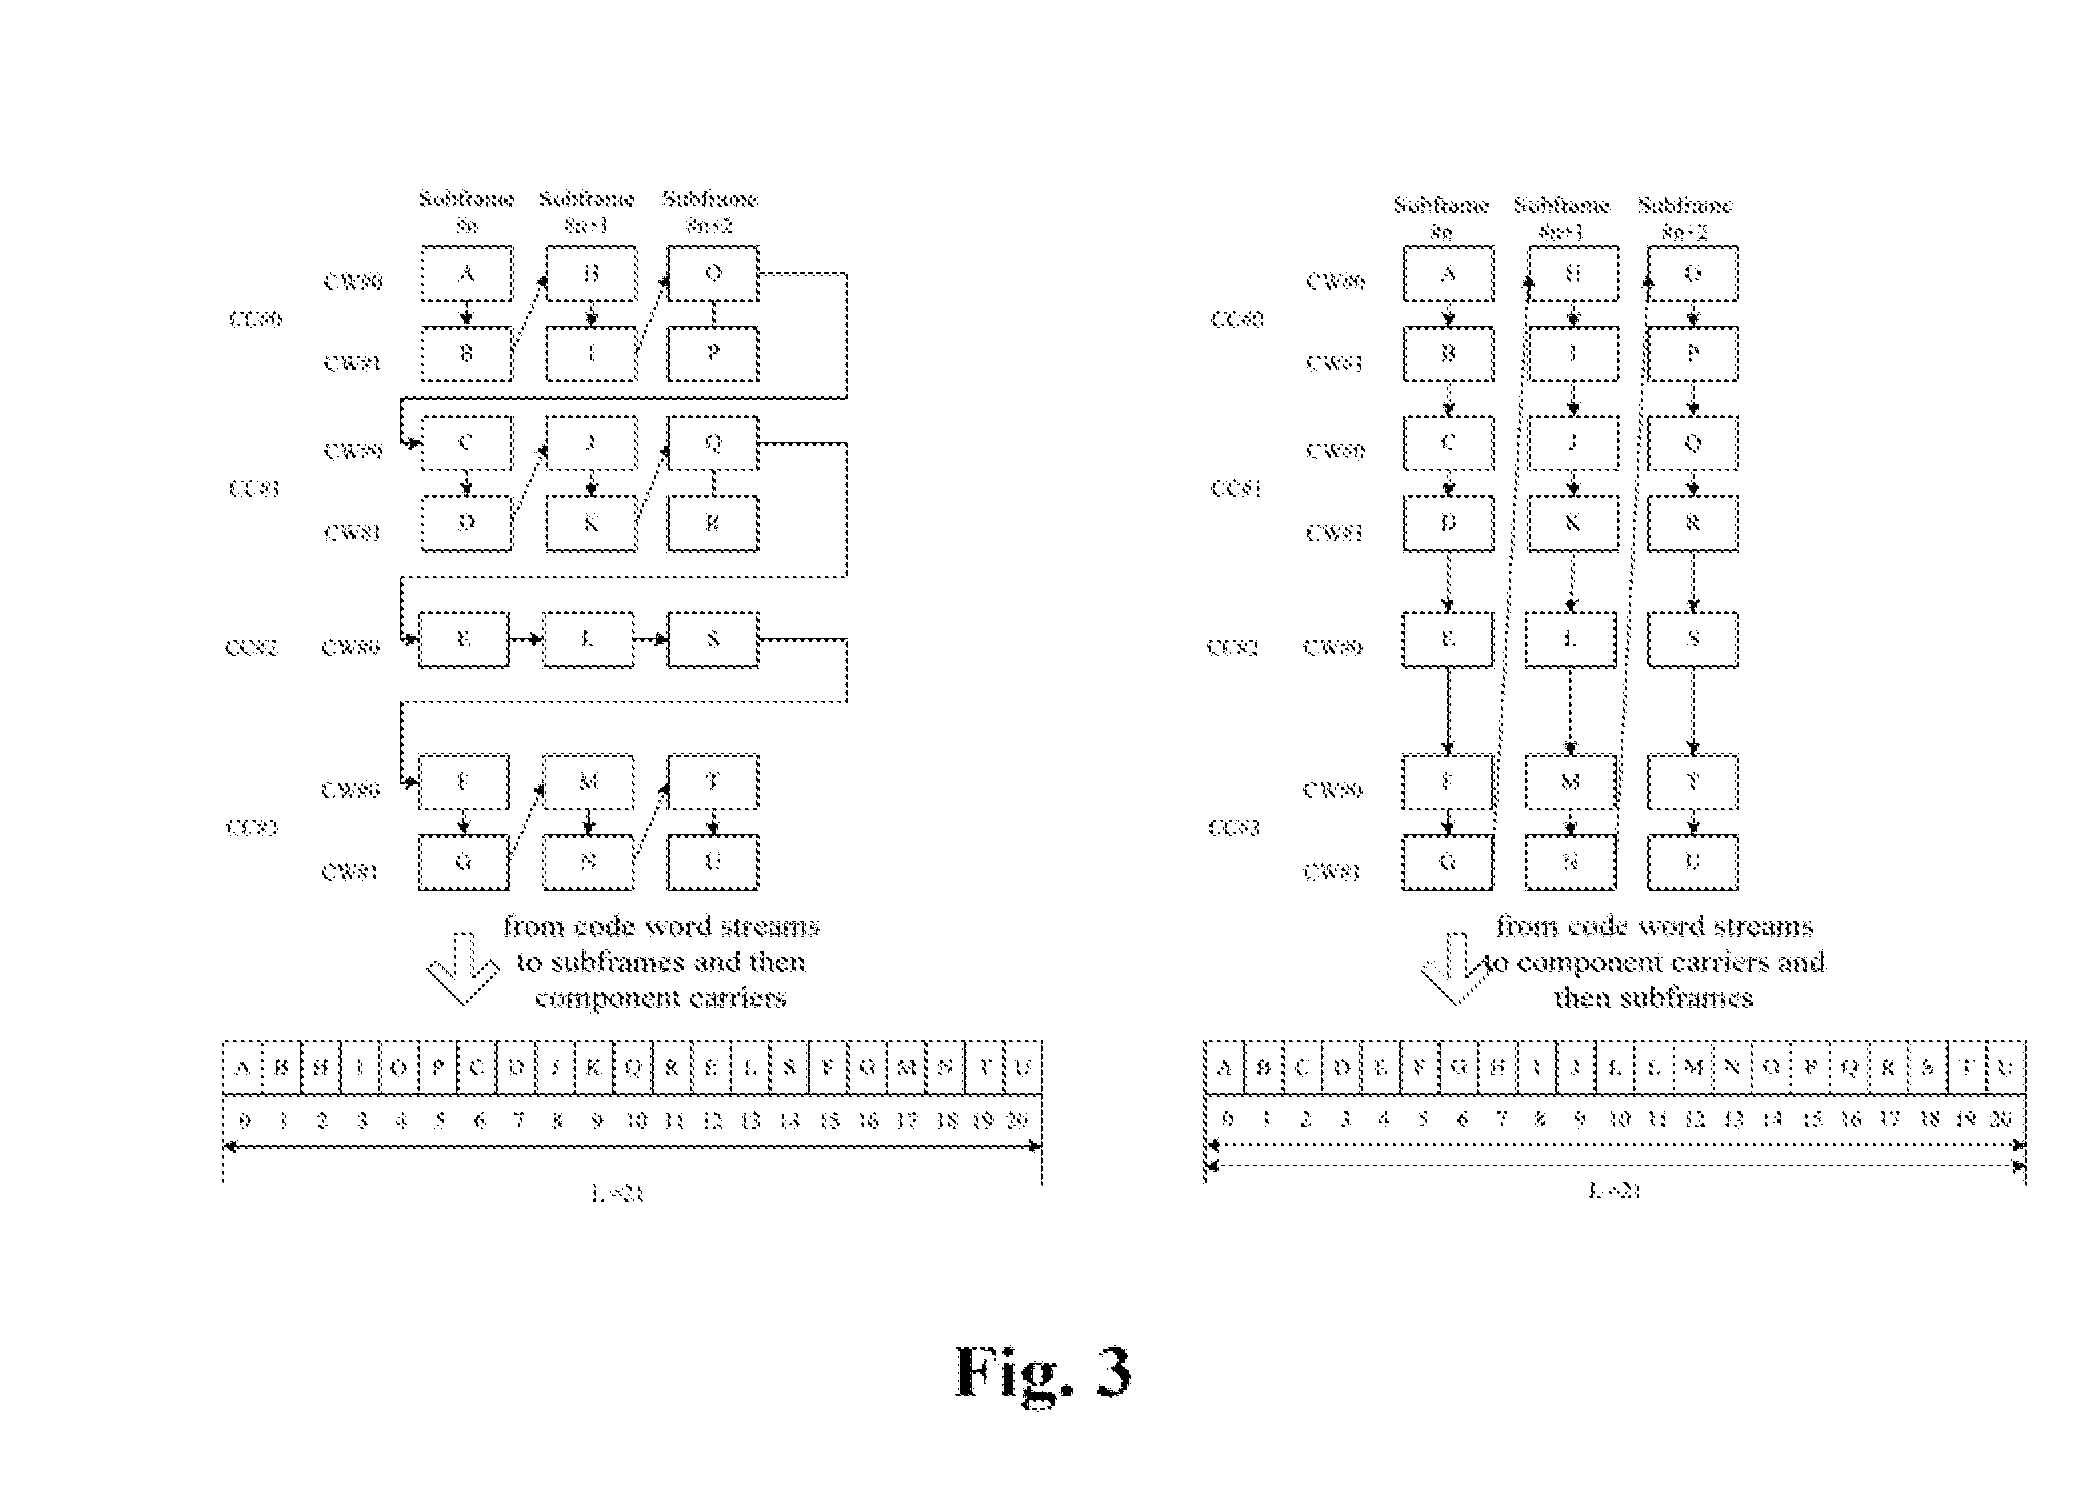 Method and User Equipment for Mapping ACK/NACK Response Messages